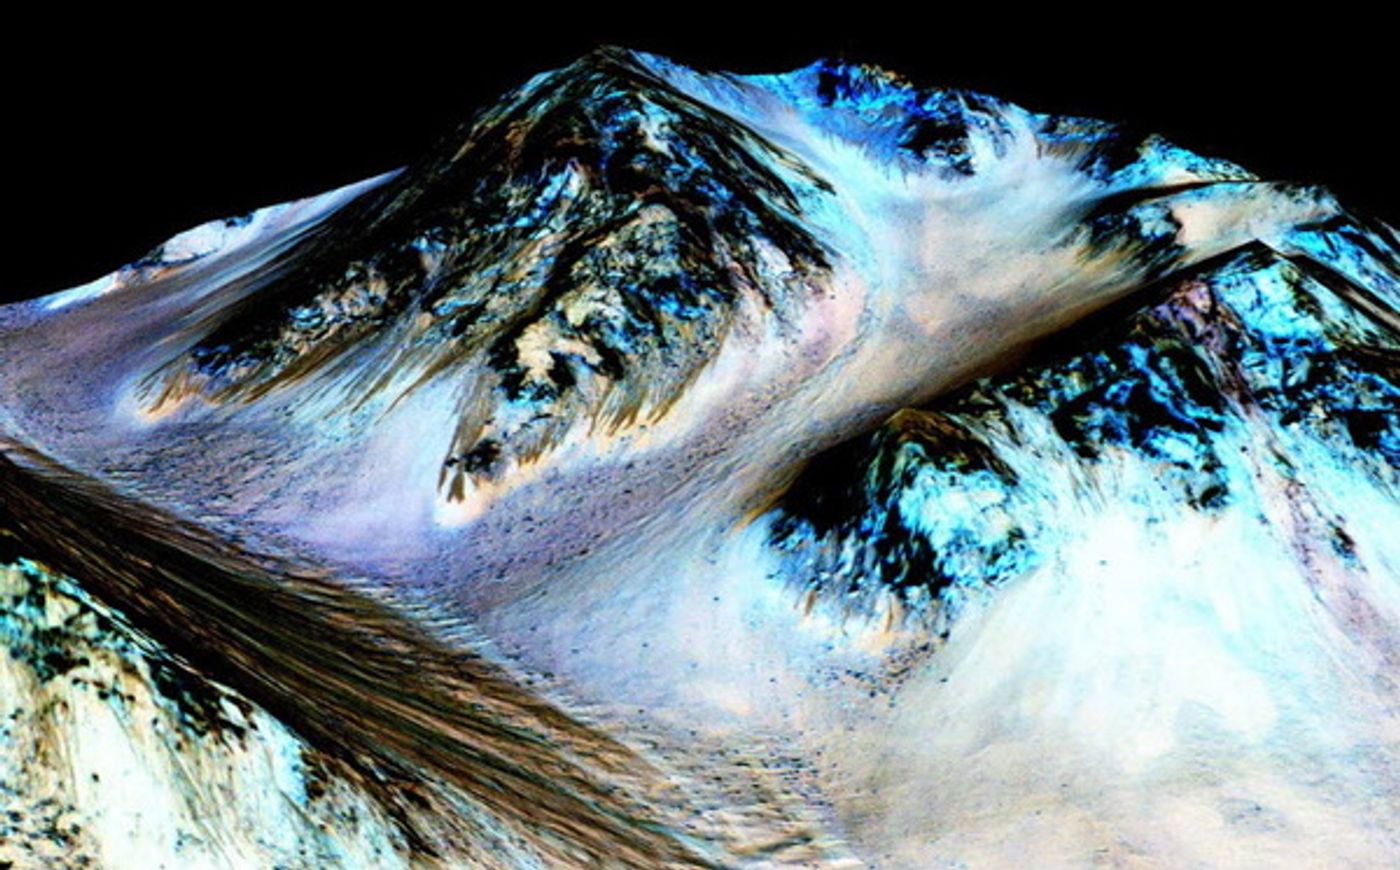 Valleys on Mars' surface probably allowed liquid water to flow many, many years ago.